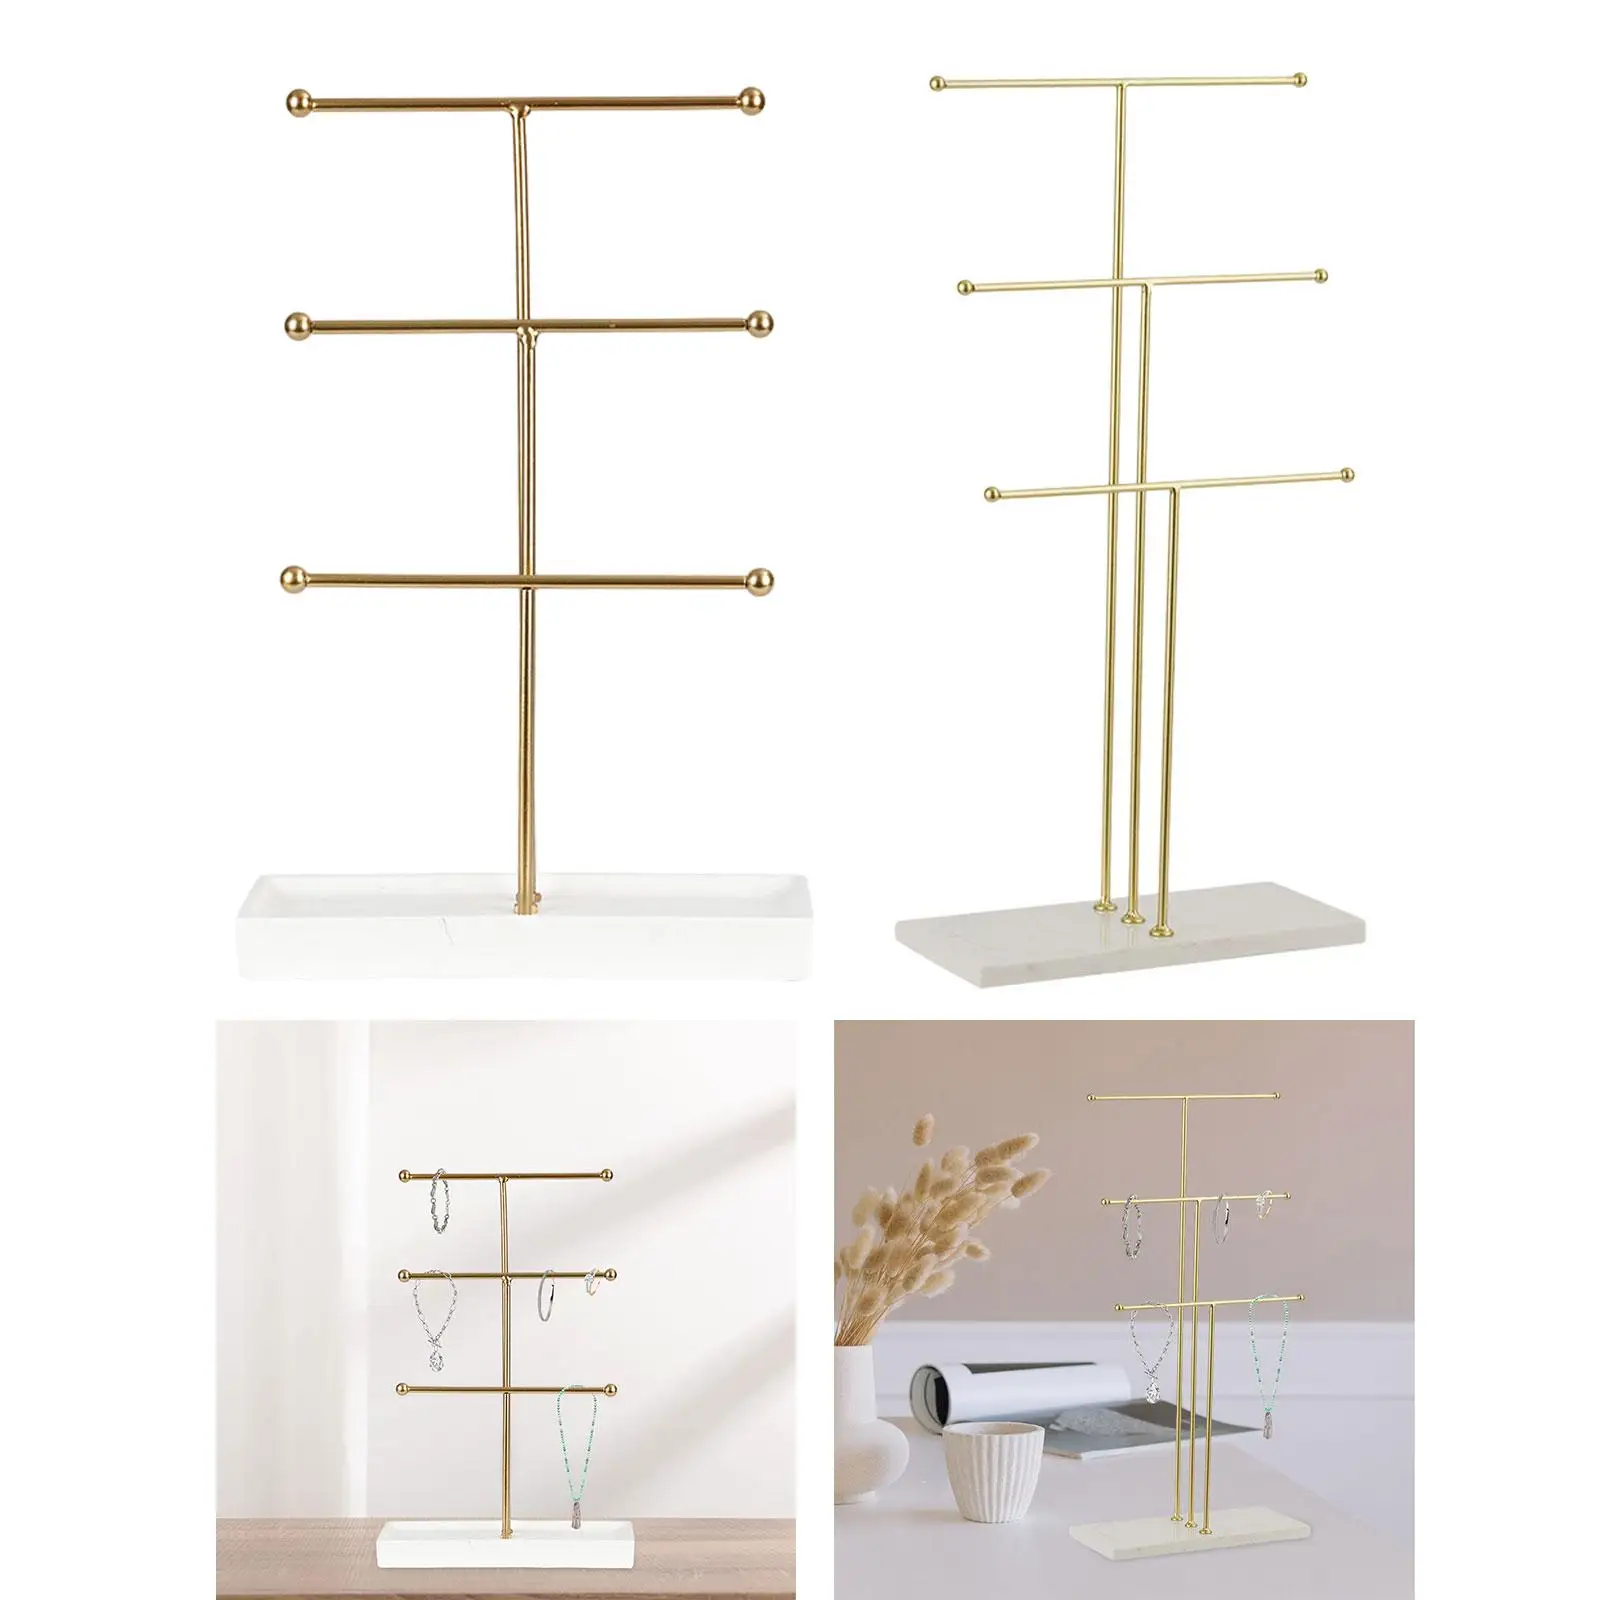 Jewelry Stand 3 Tiered Bars Jewelry Holder Home Decor Stable Base Jewelry Storage Rack Jewelry Shelf for Earrings Necklaces